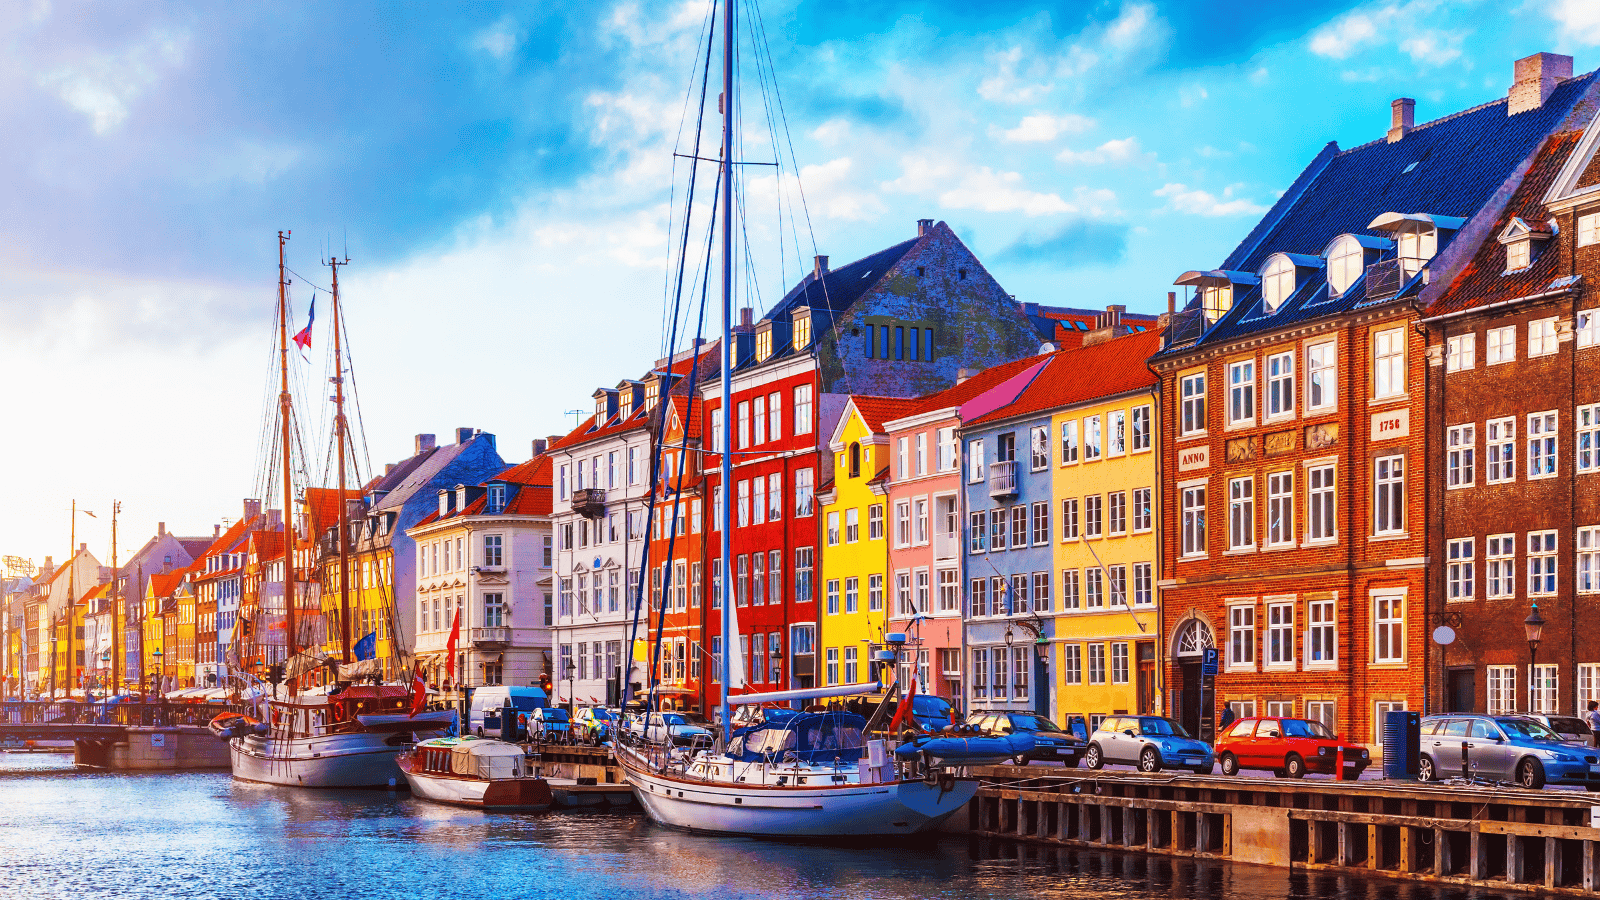 <p>Prepare to be enchanted by <a href="https://whatthefab.com/copenhagen-travel-guide.html" rel="follow">Copenhagen</a>. Expect a fulfilling visit even if you only have a few hours to explore. Refuel at a Scandinavian cafe and embark on a walking tour of the city center. The straightforward public transportation makes the airport easily accessible.</p>